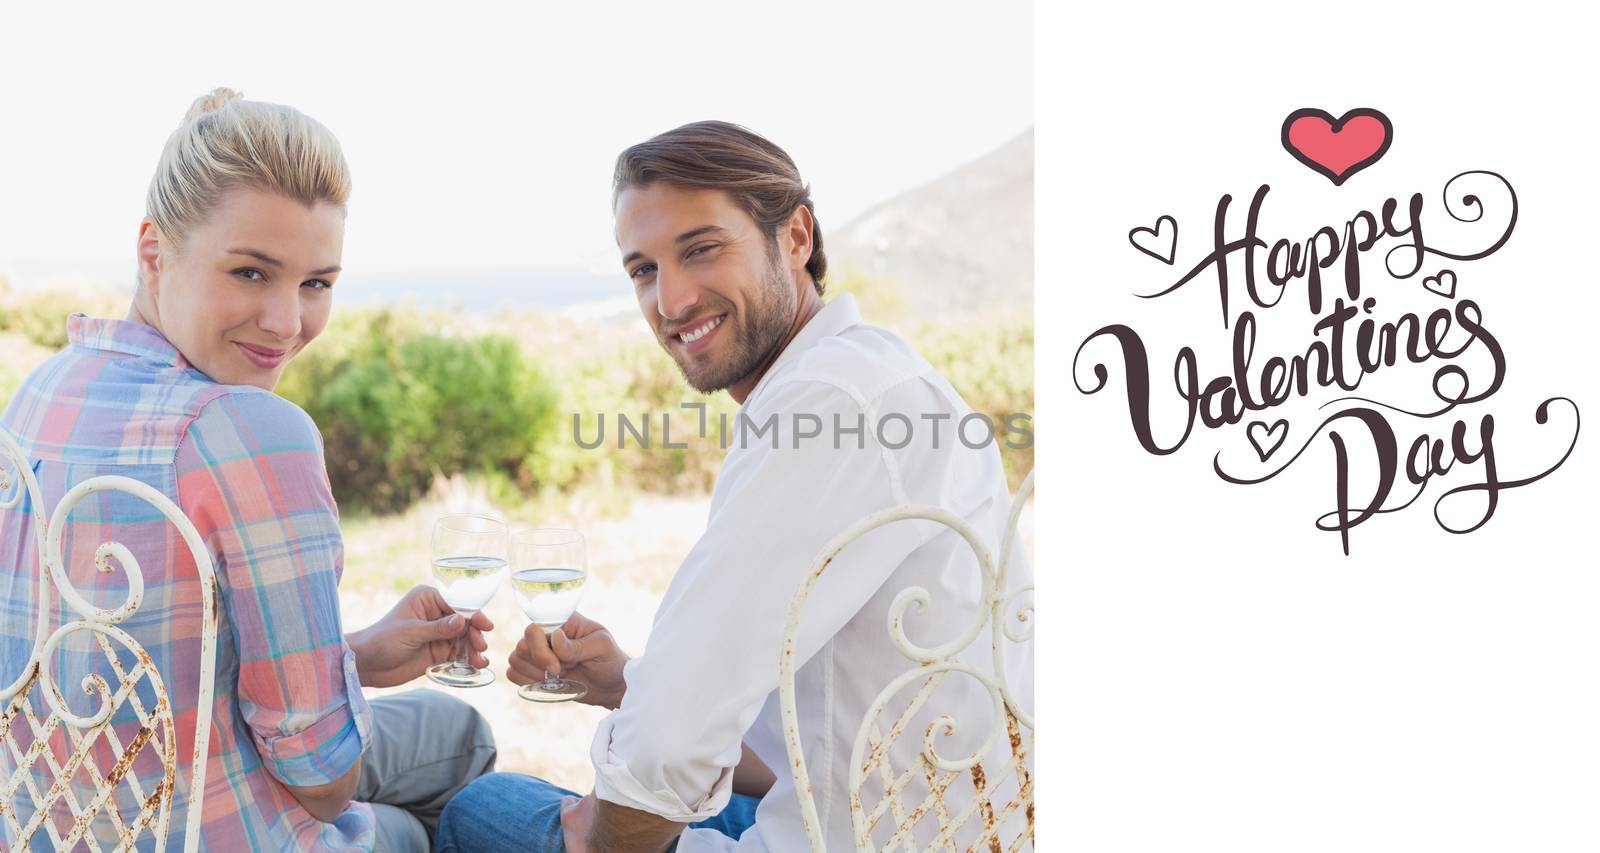 Happy young couple sitting in the garden enjoying wine together against happy valentines day